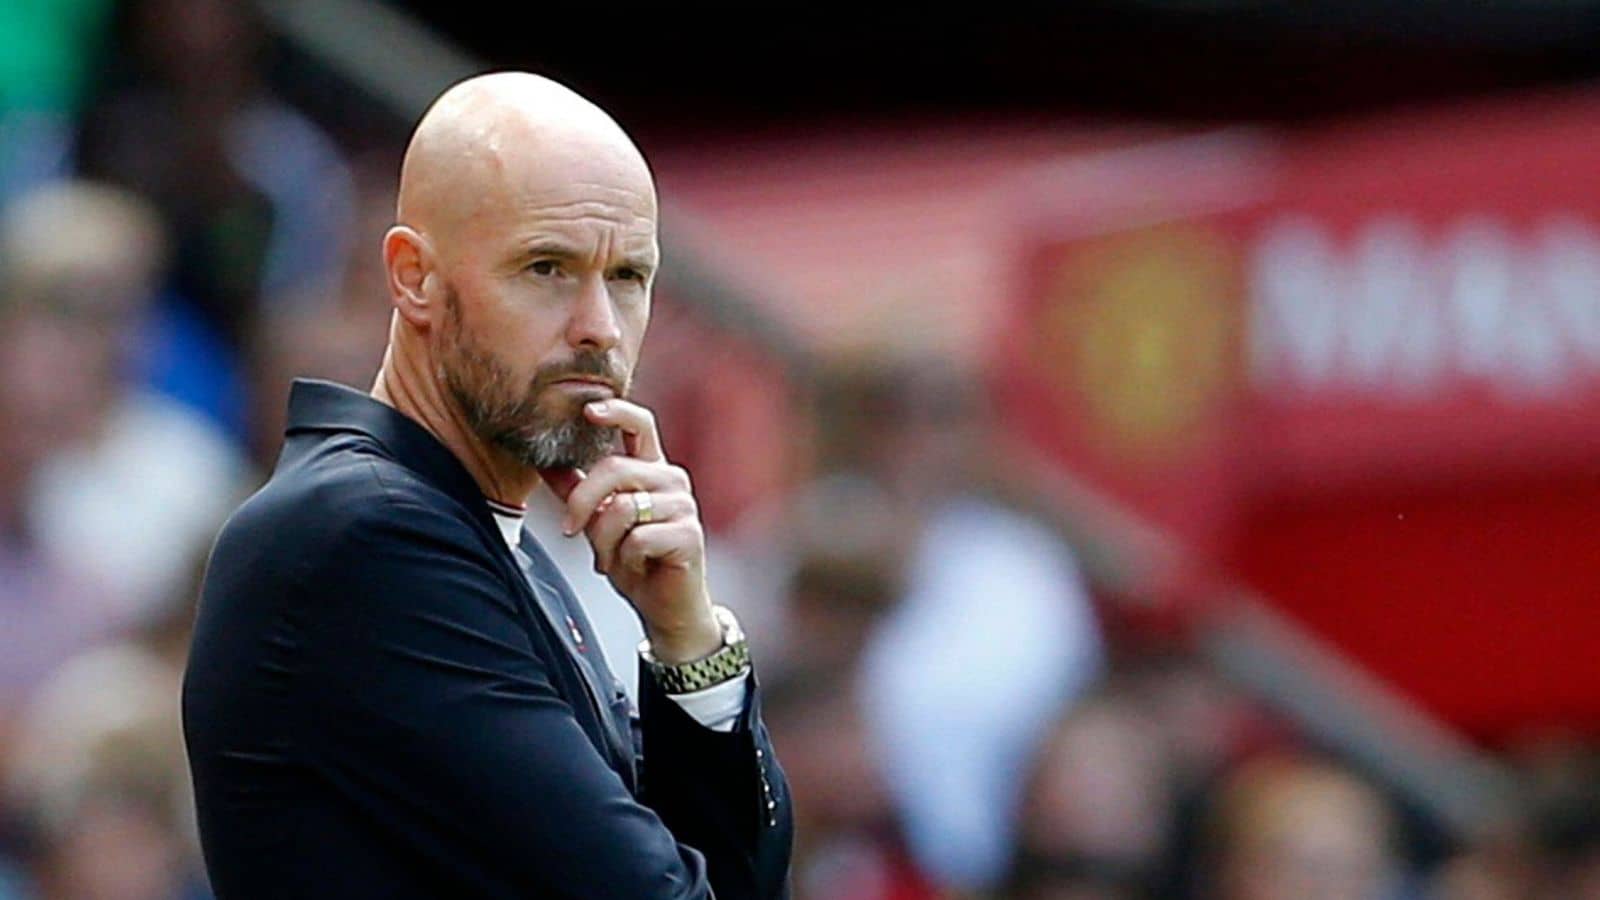 Manchester United Manager Erik ten Hag Laments Unfortunate Loss to Arsenal in North London Clash